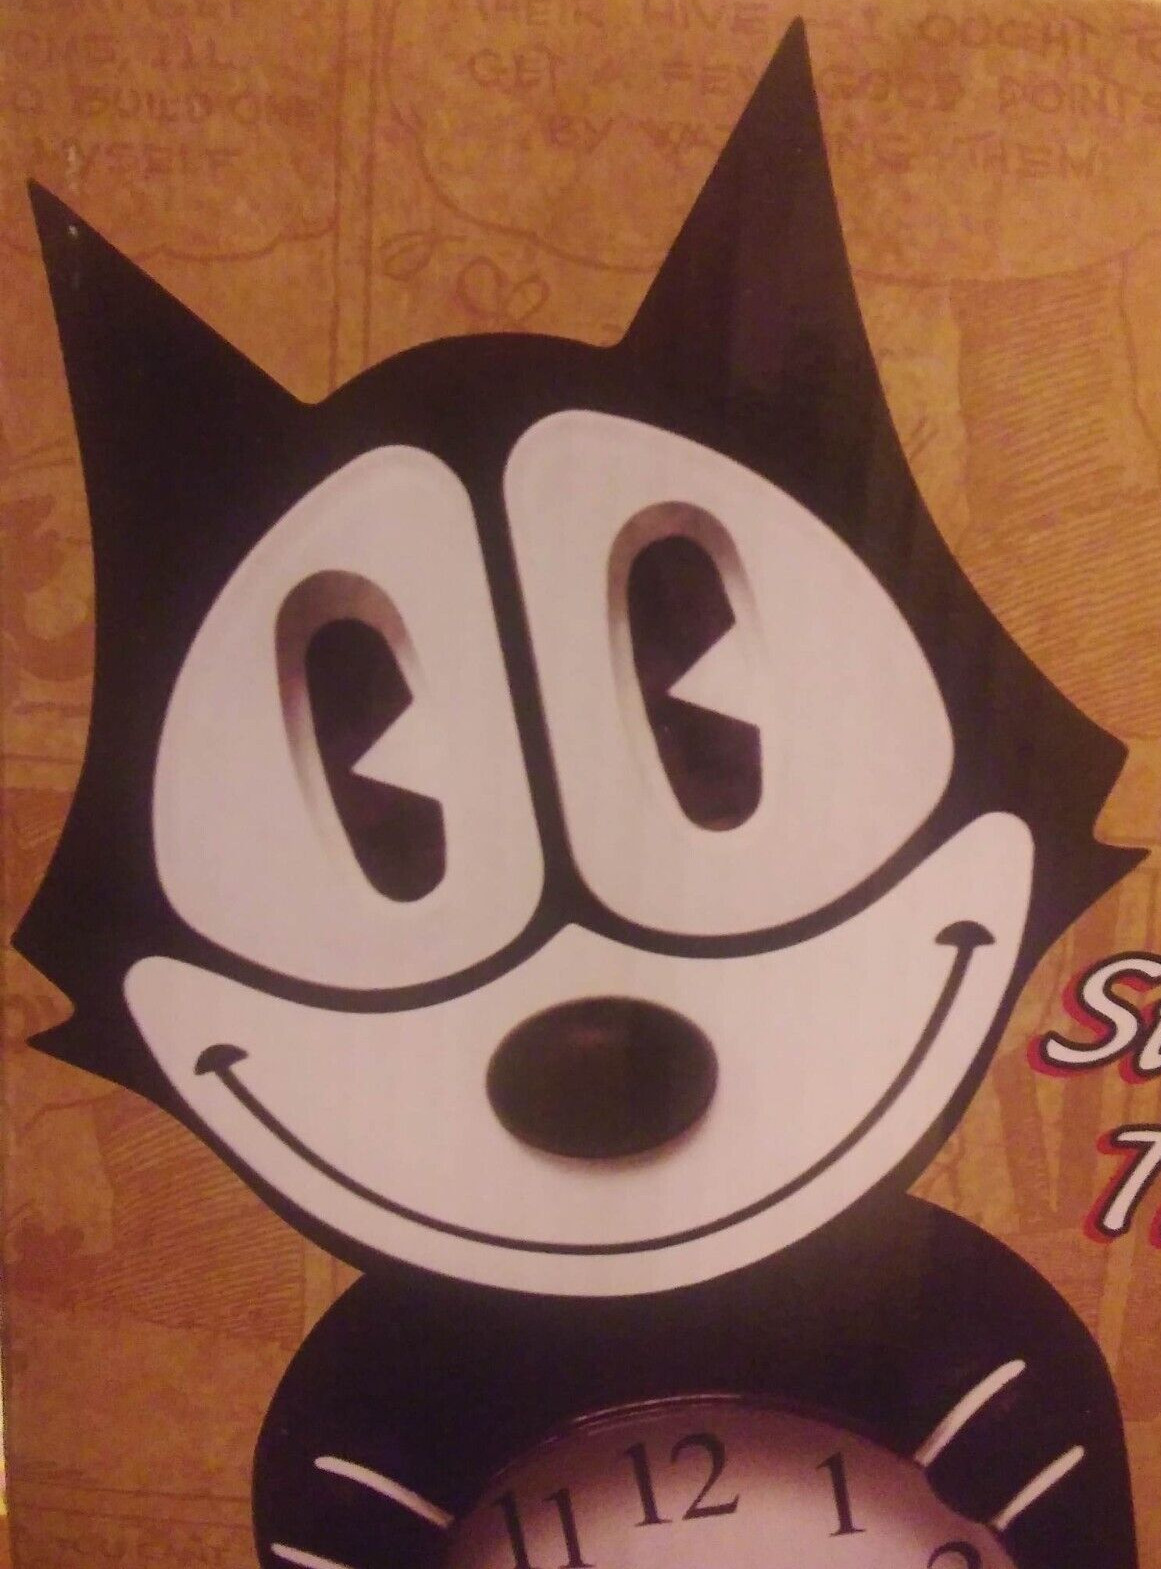 FELIX THE CAT: Animated Clock-Eyes Move Back-N-Forth & The Tail is the Pendulum